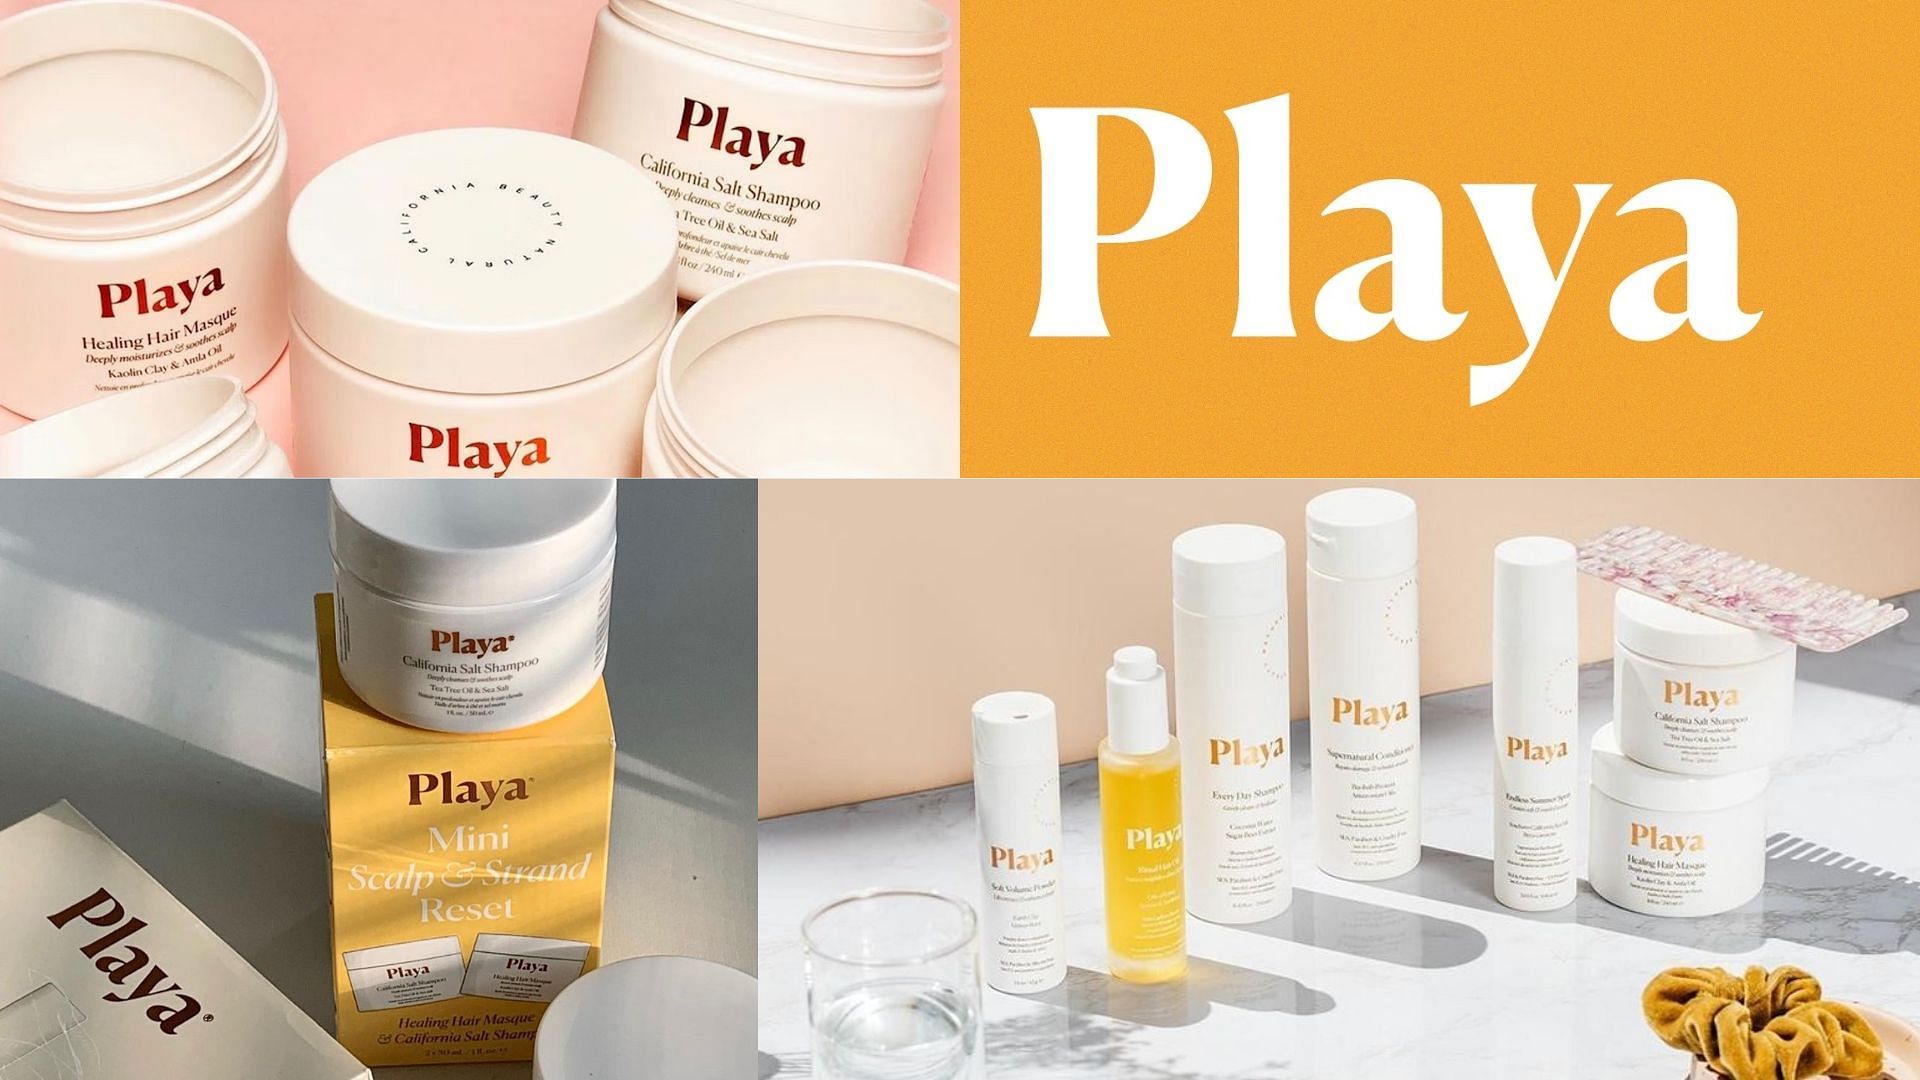 Playa hair care has been extremely popular over the last few years (Image via Facebook/Playa)